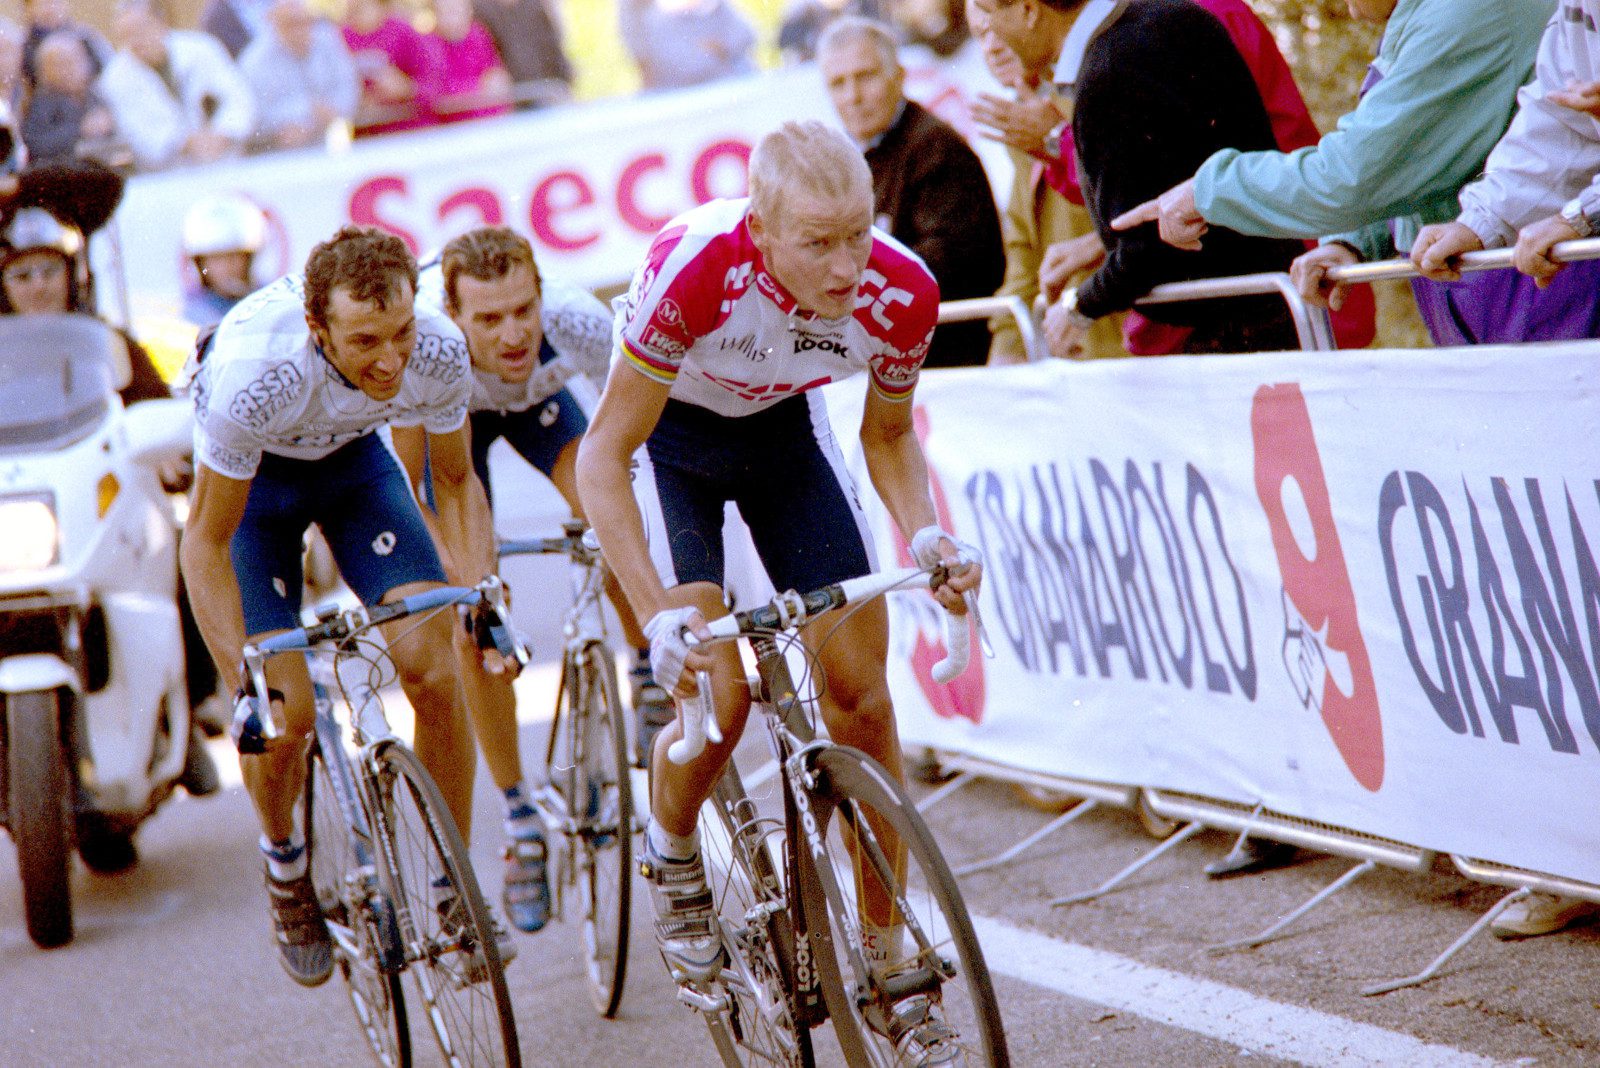 Cycling: Michael Rasmussen - my doping decade, The Independent